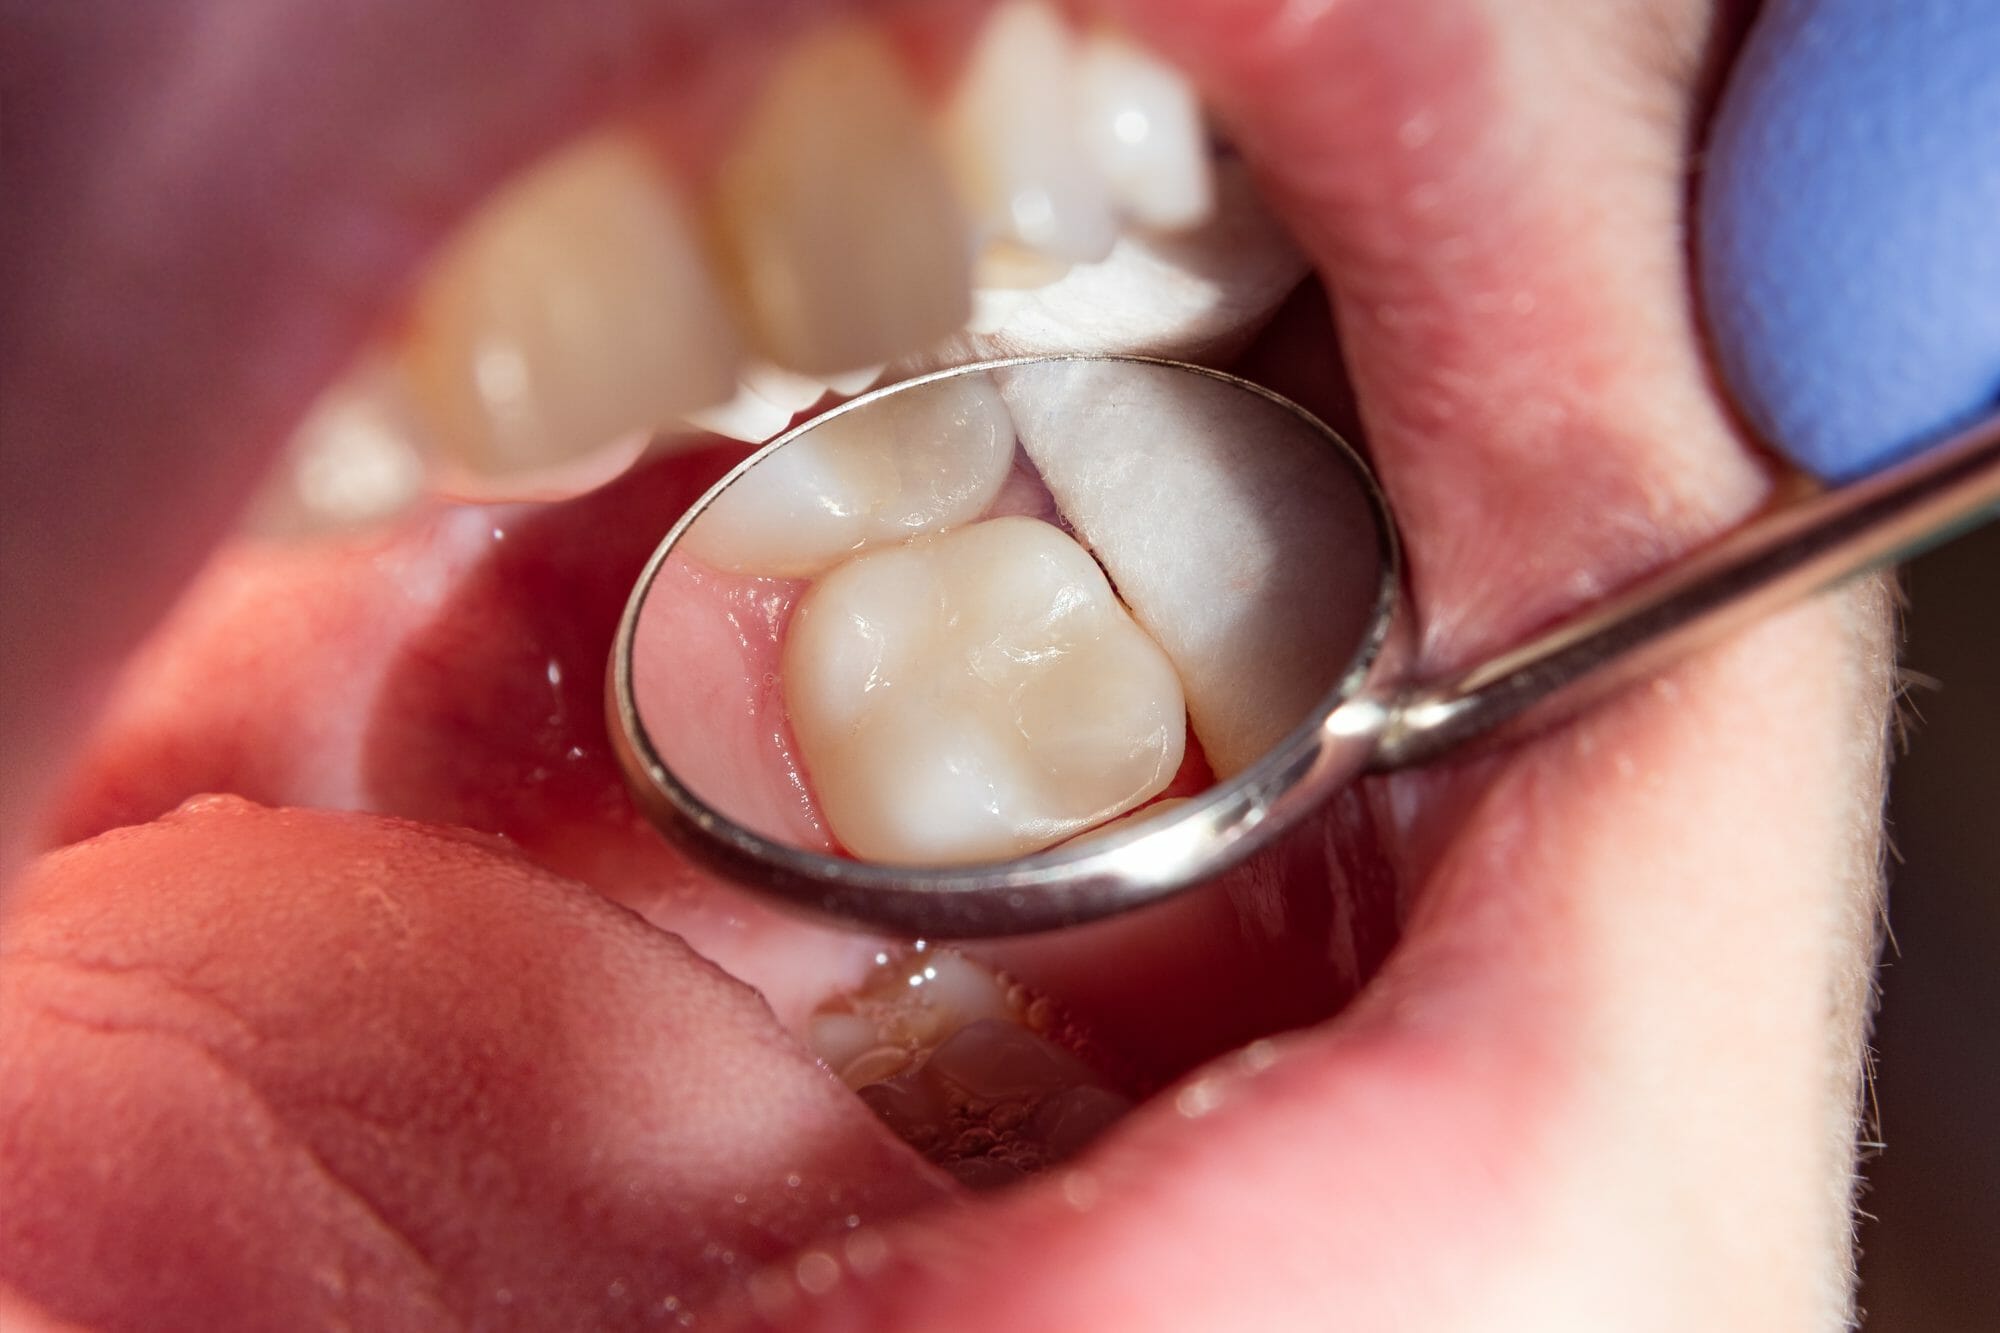 Fillings in Dentistry, What is it? Learn all about it.